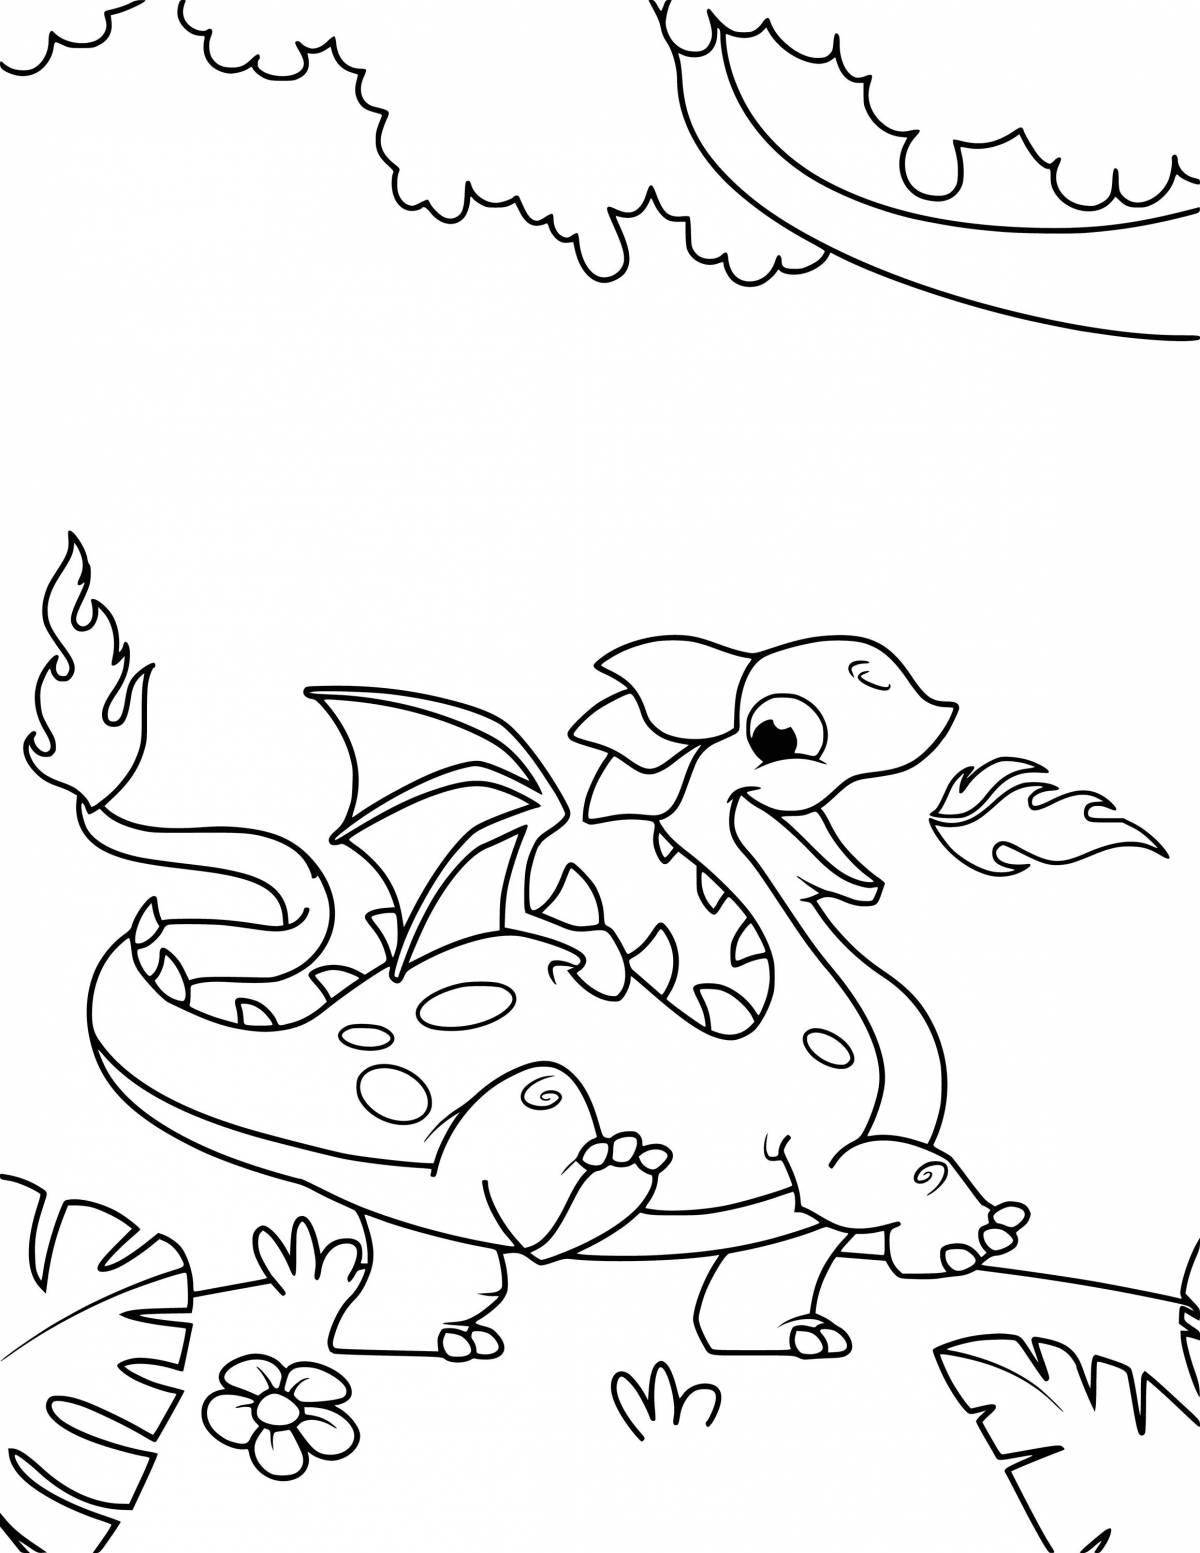 Cute and fluffy dragon coloring book